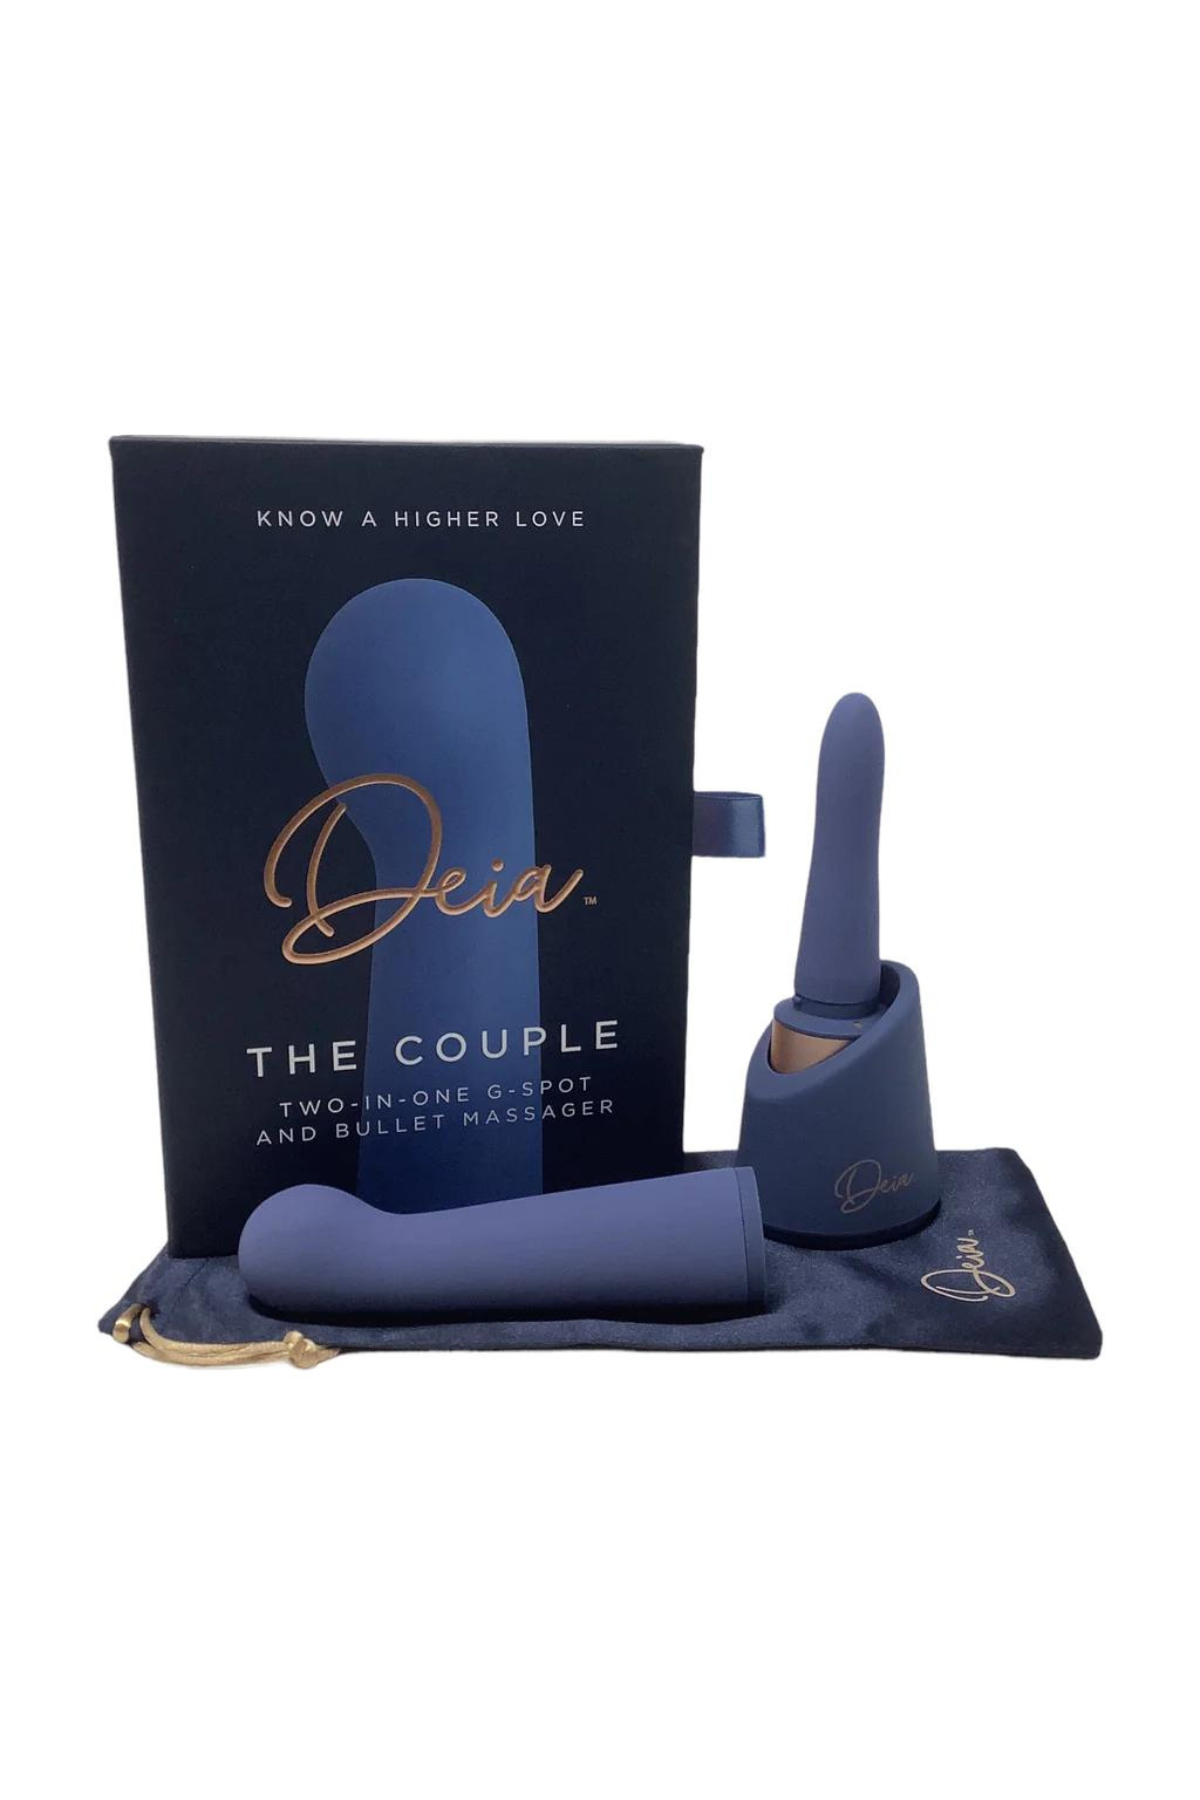 Shop This The Couple Two-in-One Massager Online | Matilda's Lifestyle